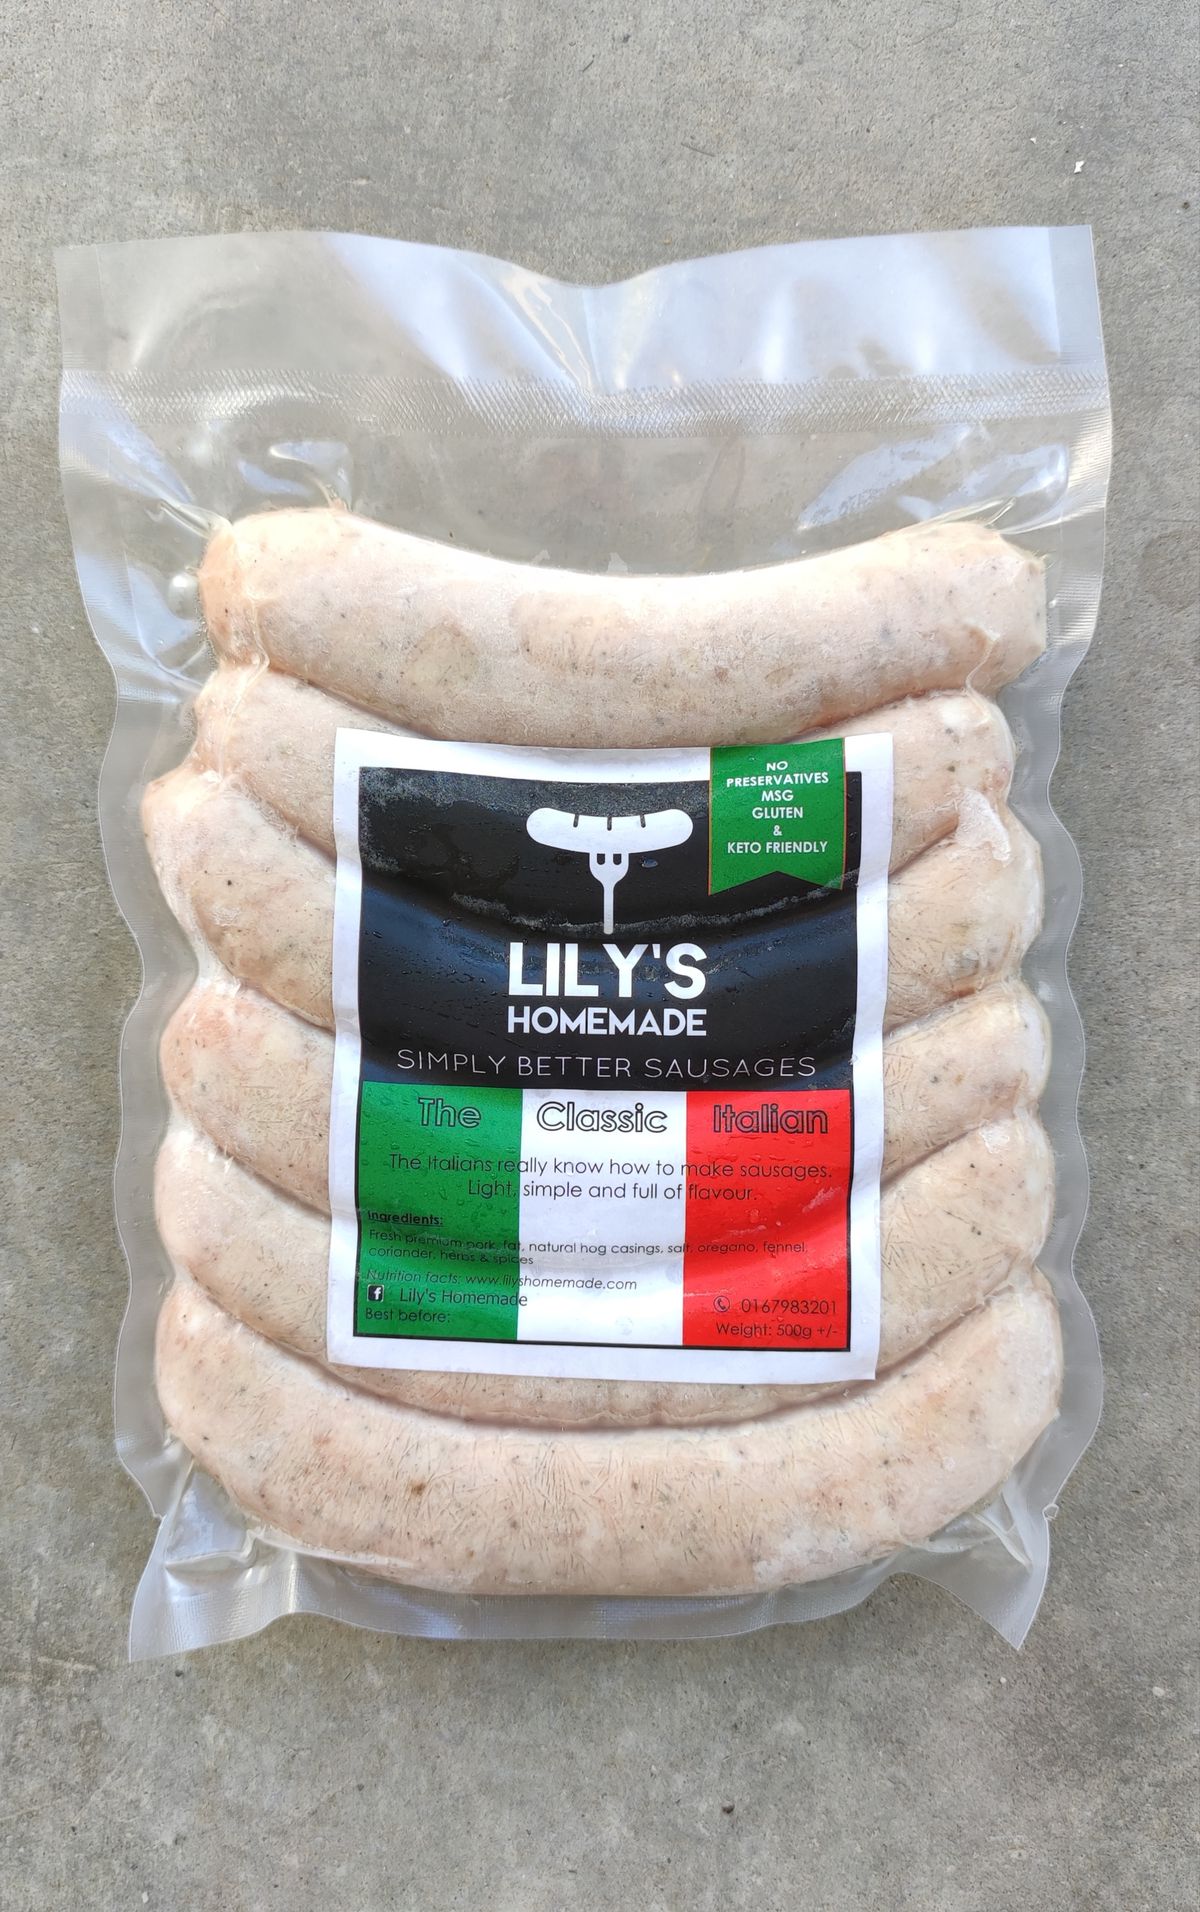 Check out these Grocery Stores for the best Italian sausage